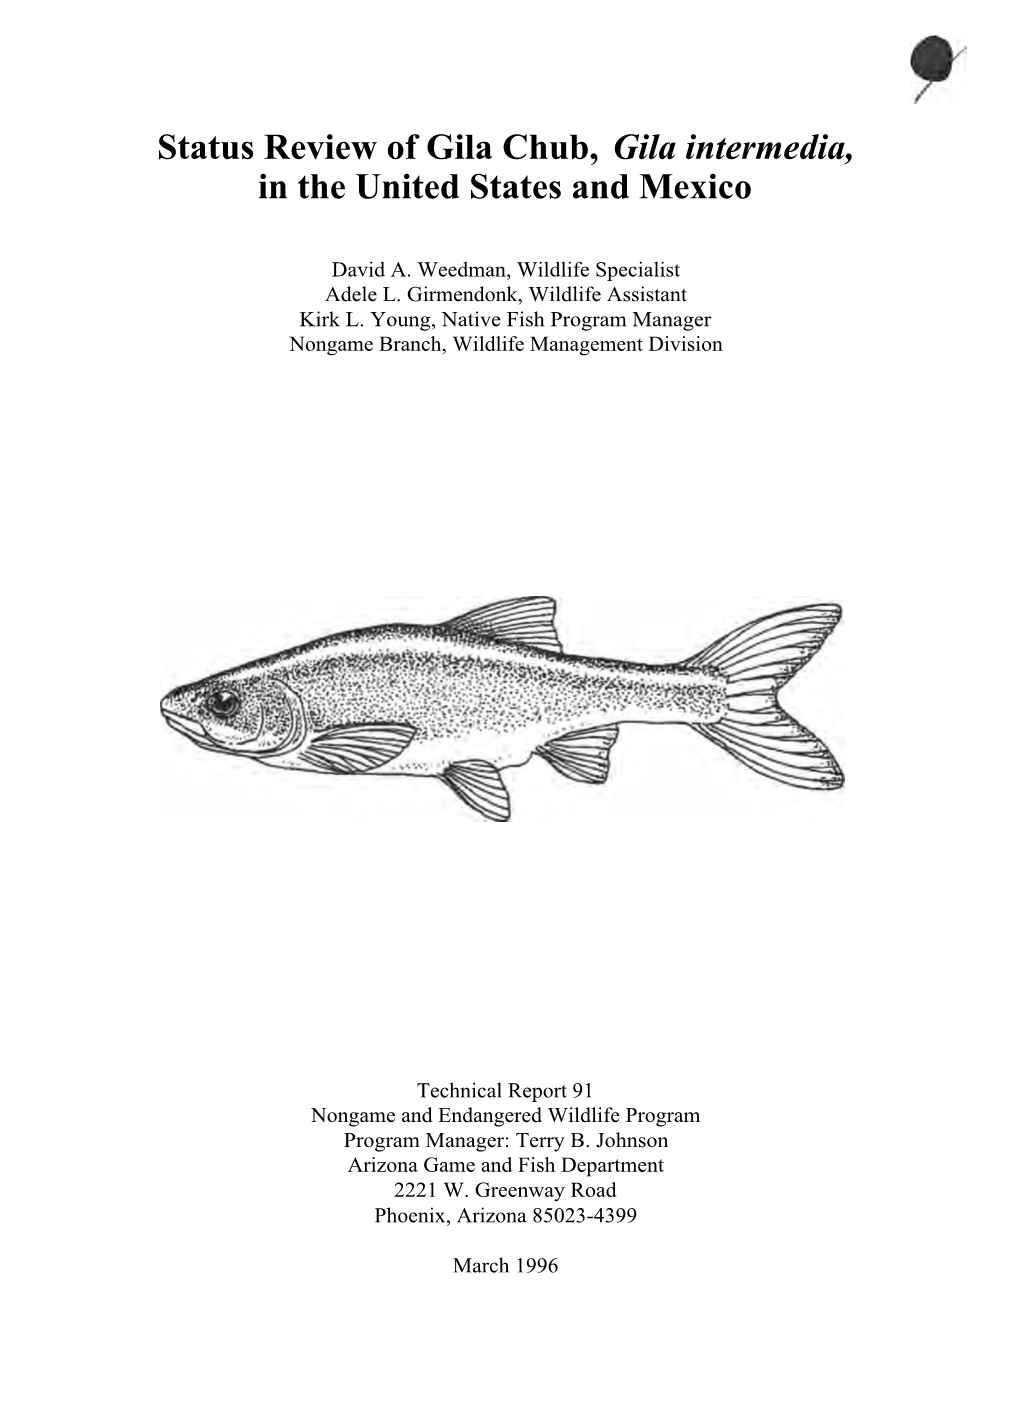 Status Review of Gila Chub, Gila Intermedia, in the United States and Mexico